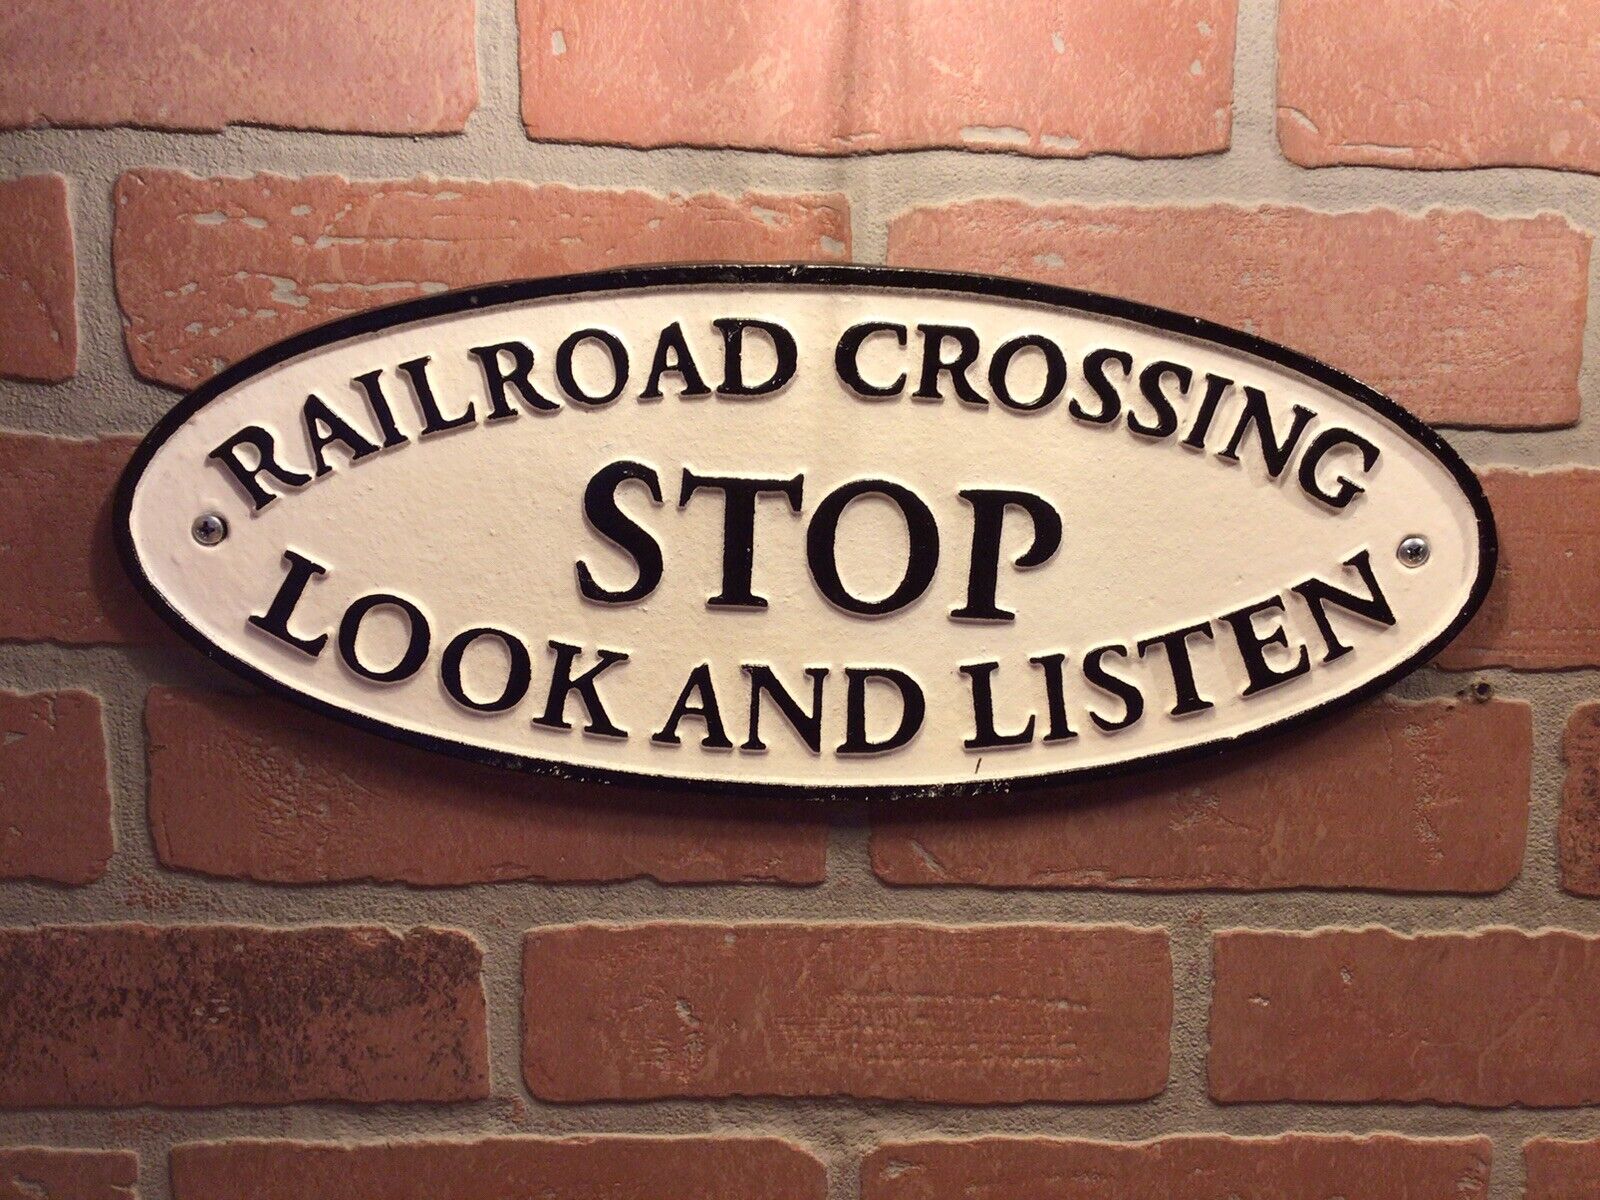 Vintage Style Cast Iron Railroad Stop Look and Listen Crossing Sign A Great Gift